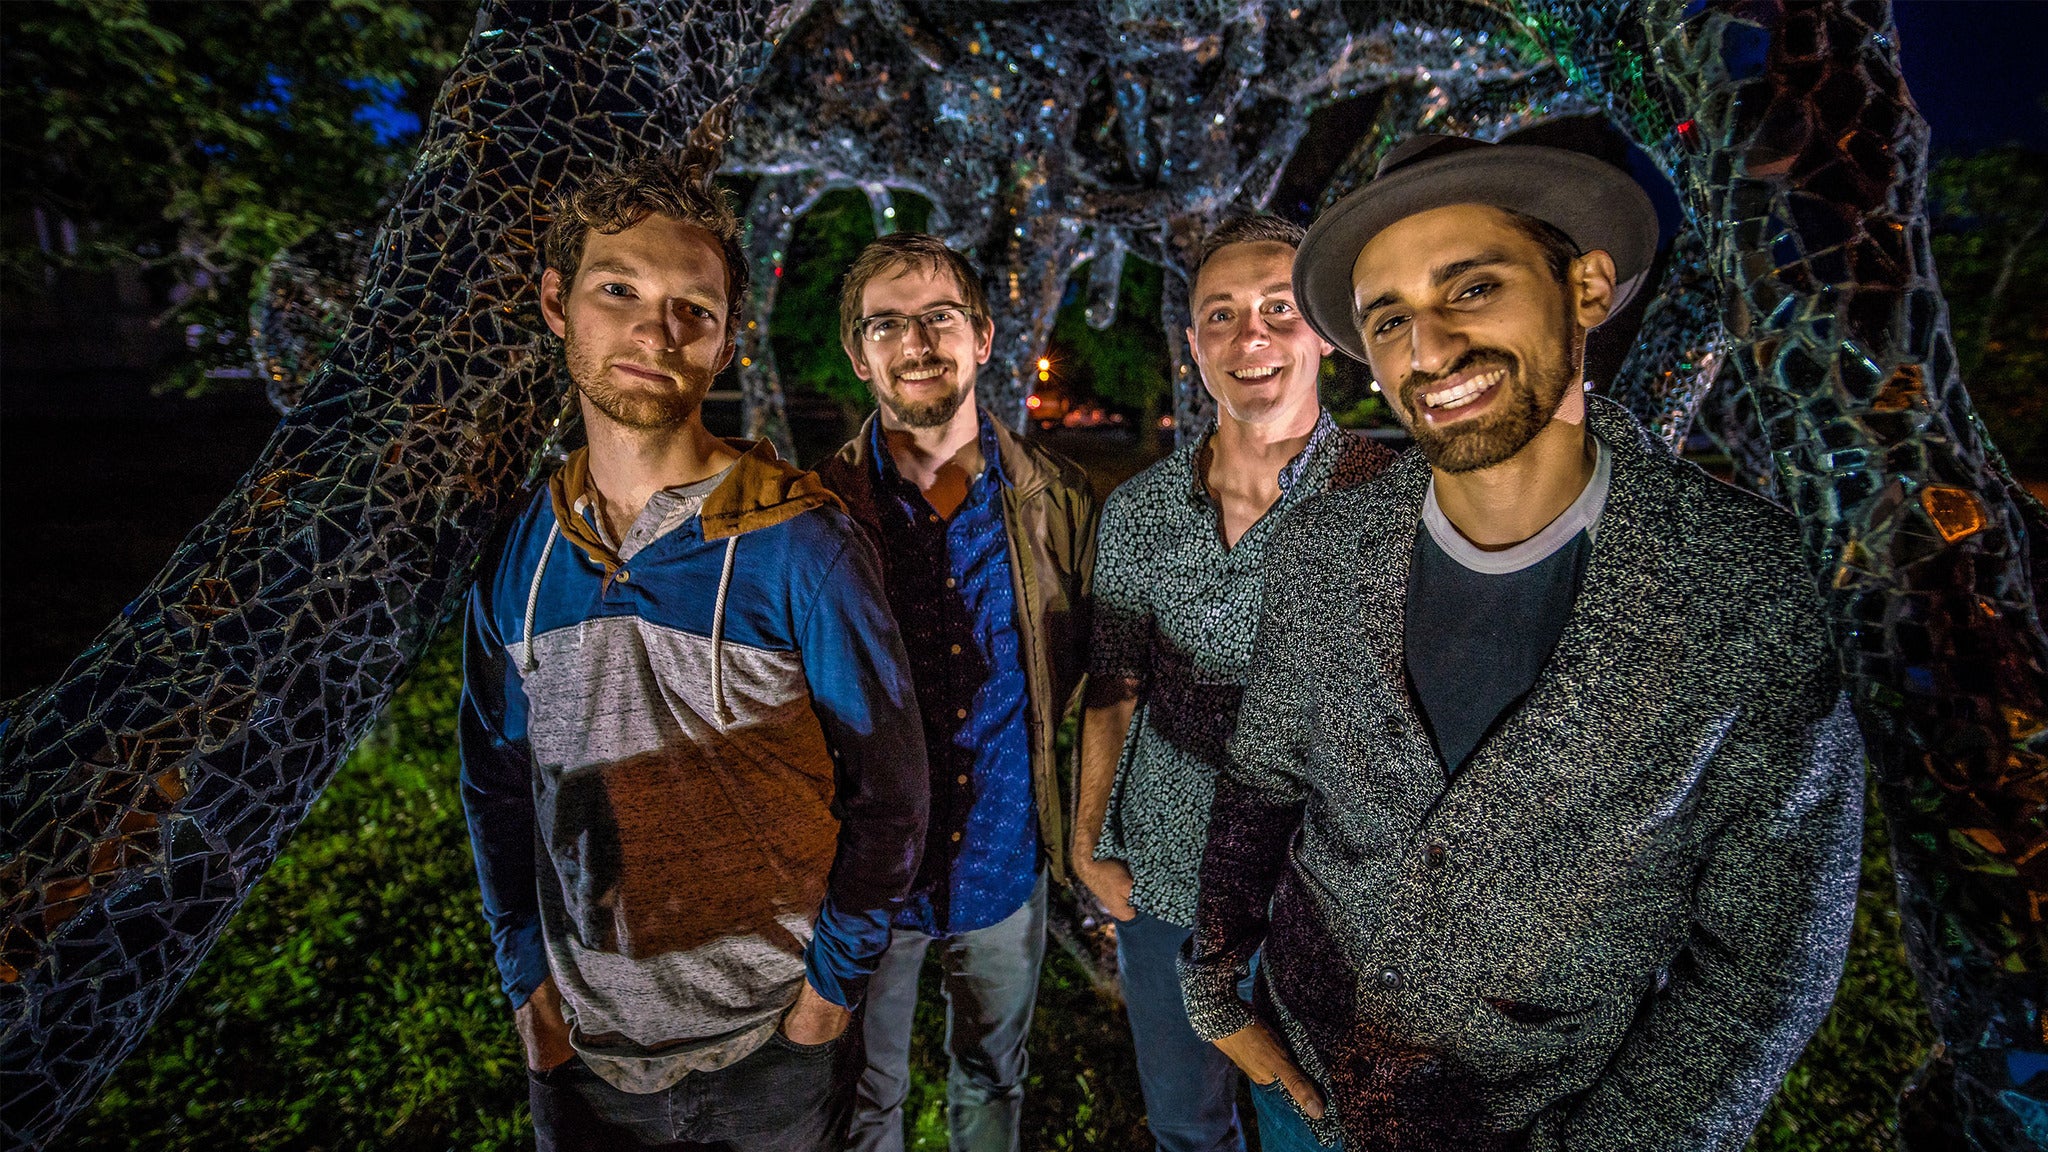 Aqueous in New Orleans promo photo for Live Nation presale offer code